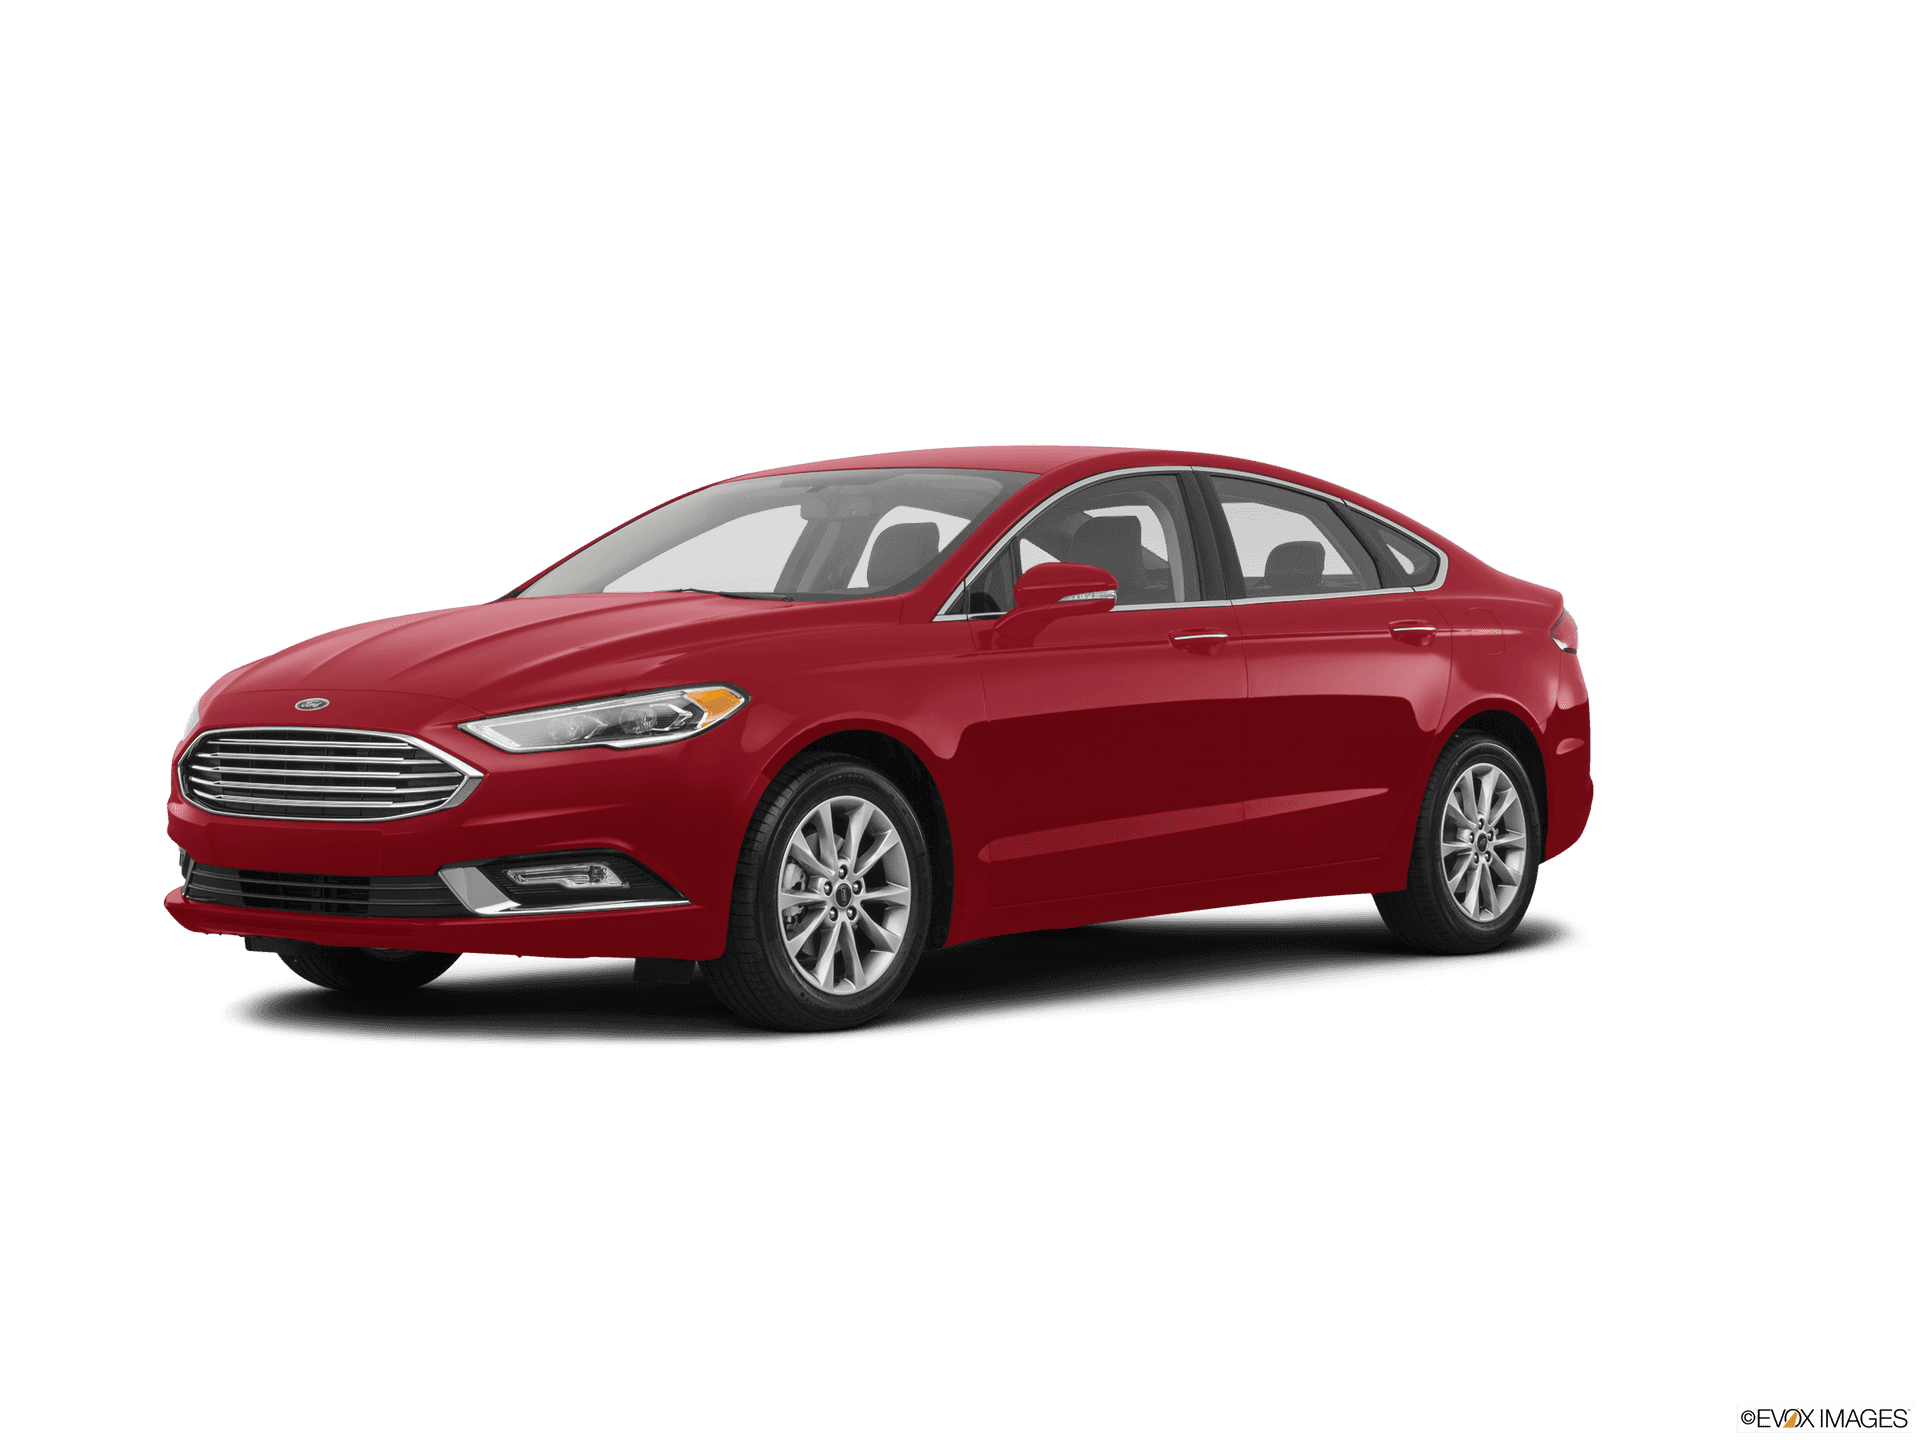 Red Ford Fusion Side View PNG image